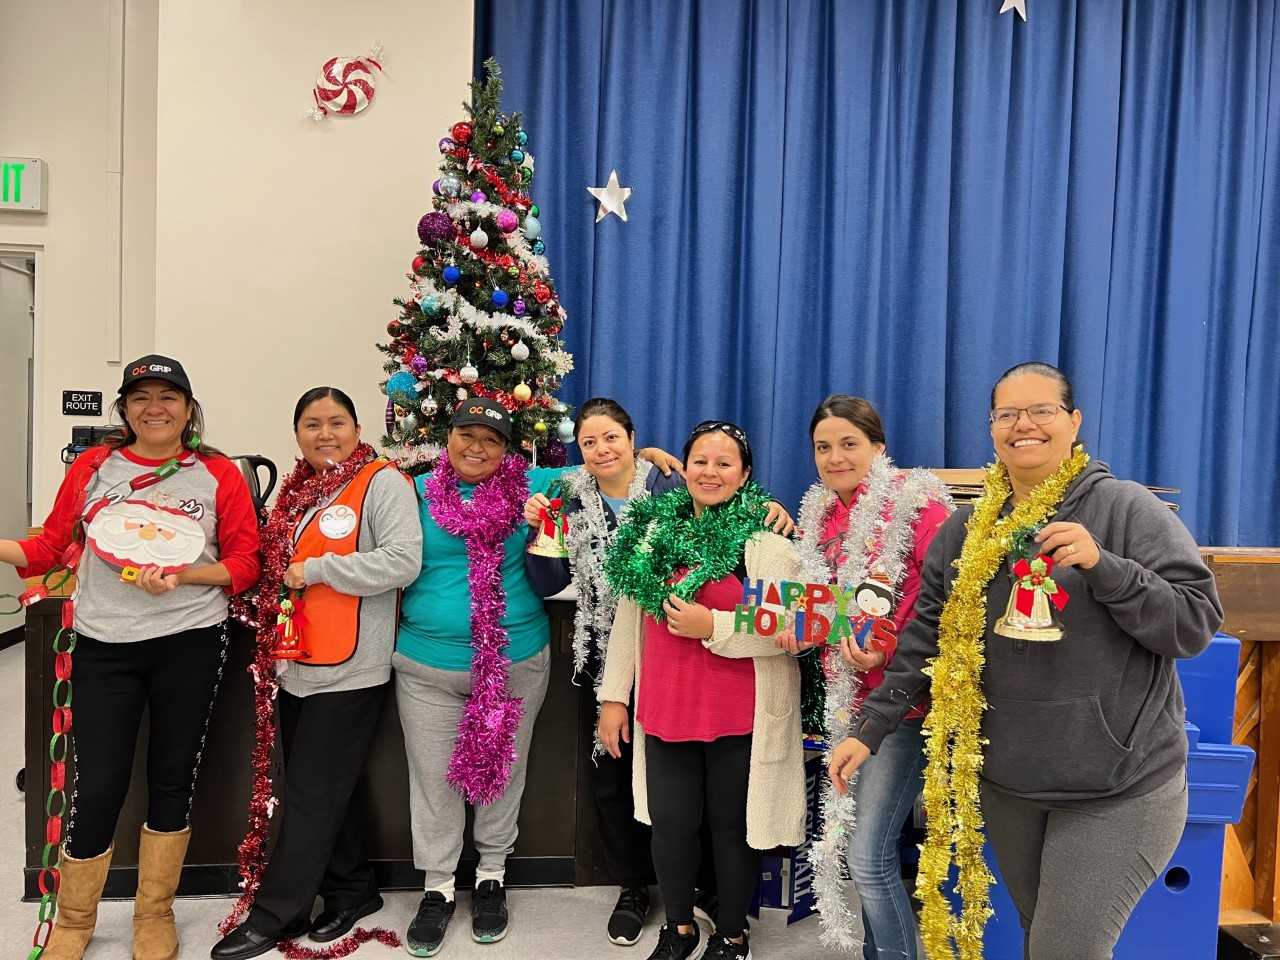 Our parents are having fun making our MPR look festive!